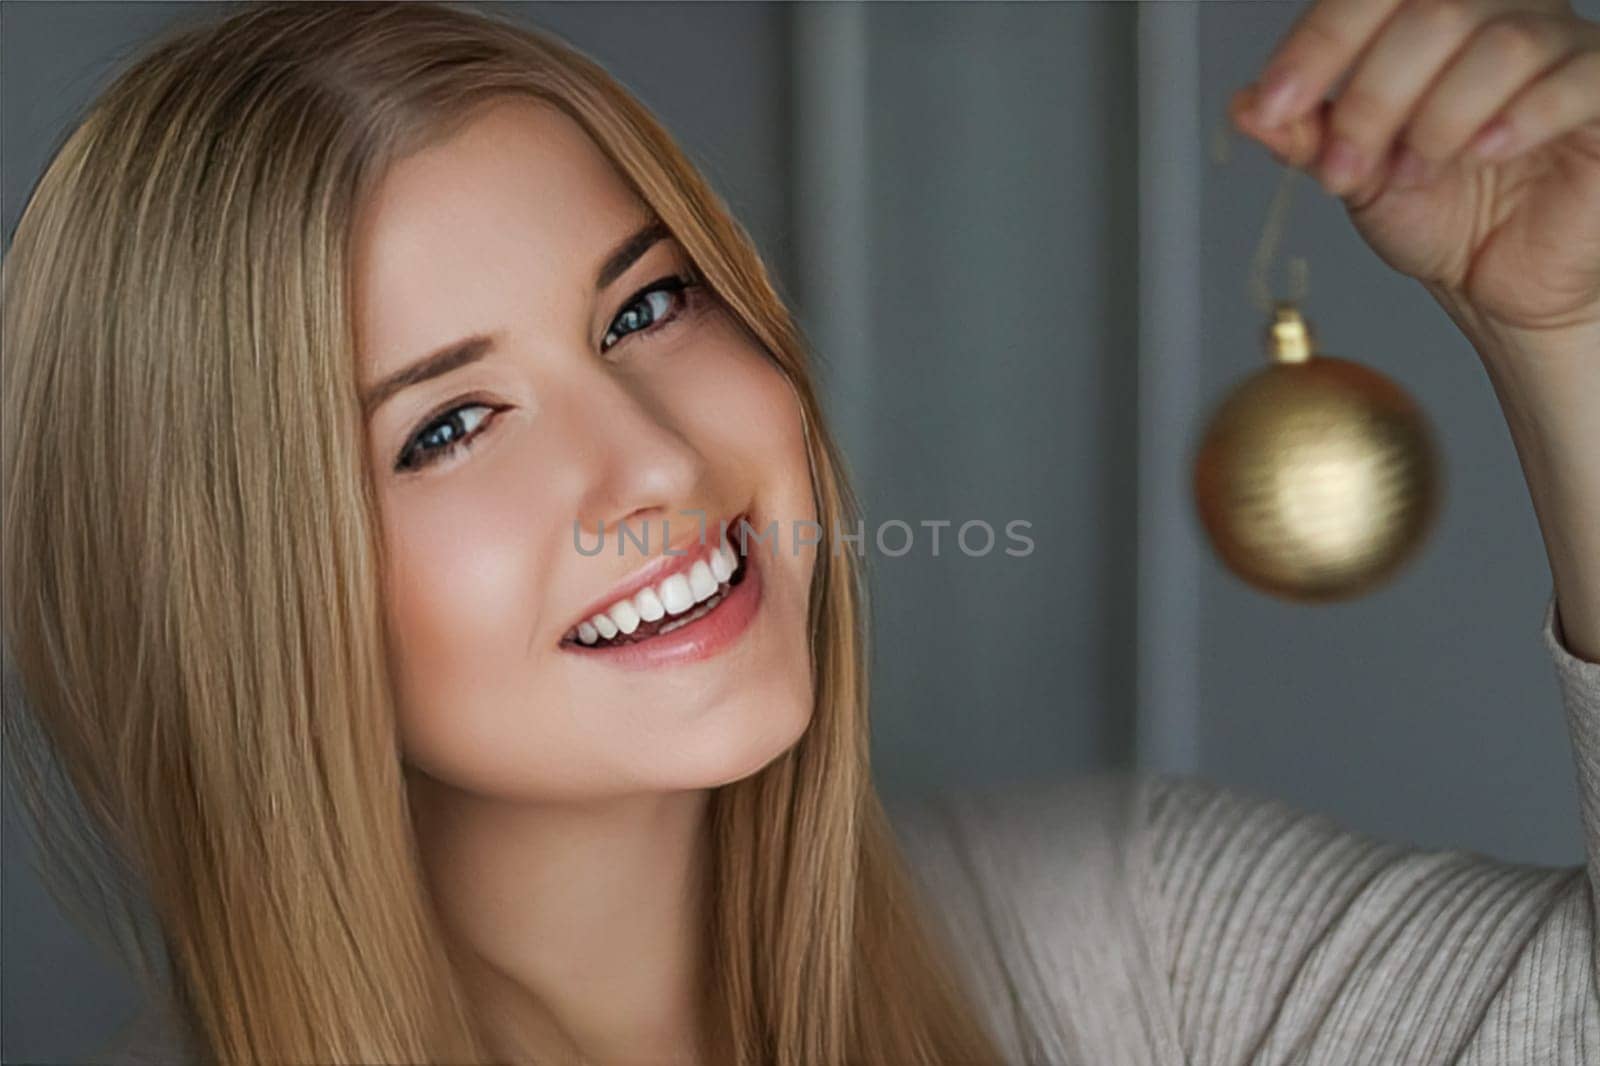 Beauty, Christmas and winter holidays, happy smiling woman and holiday Christmas tree decorations as lifestyle, celebration and home decor inspiration